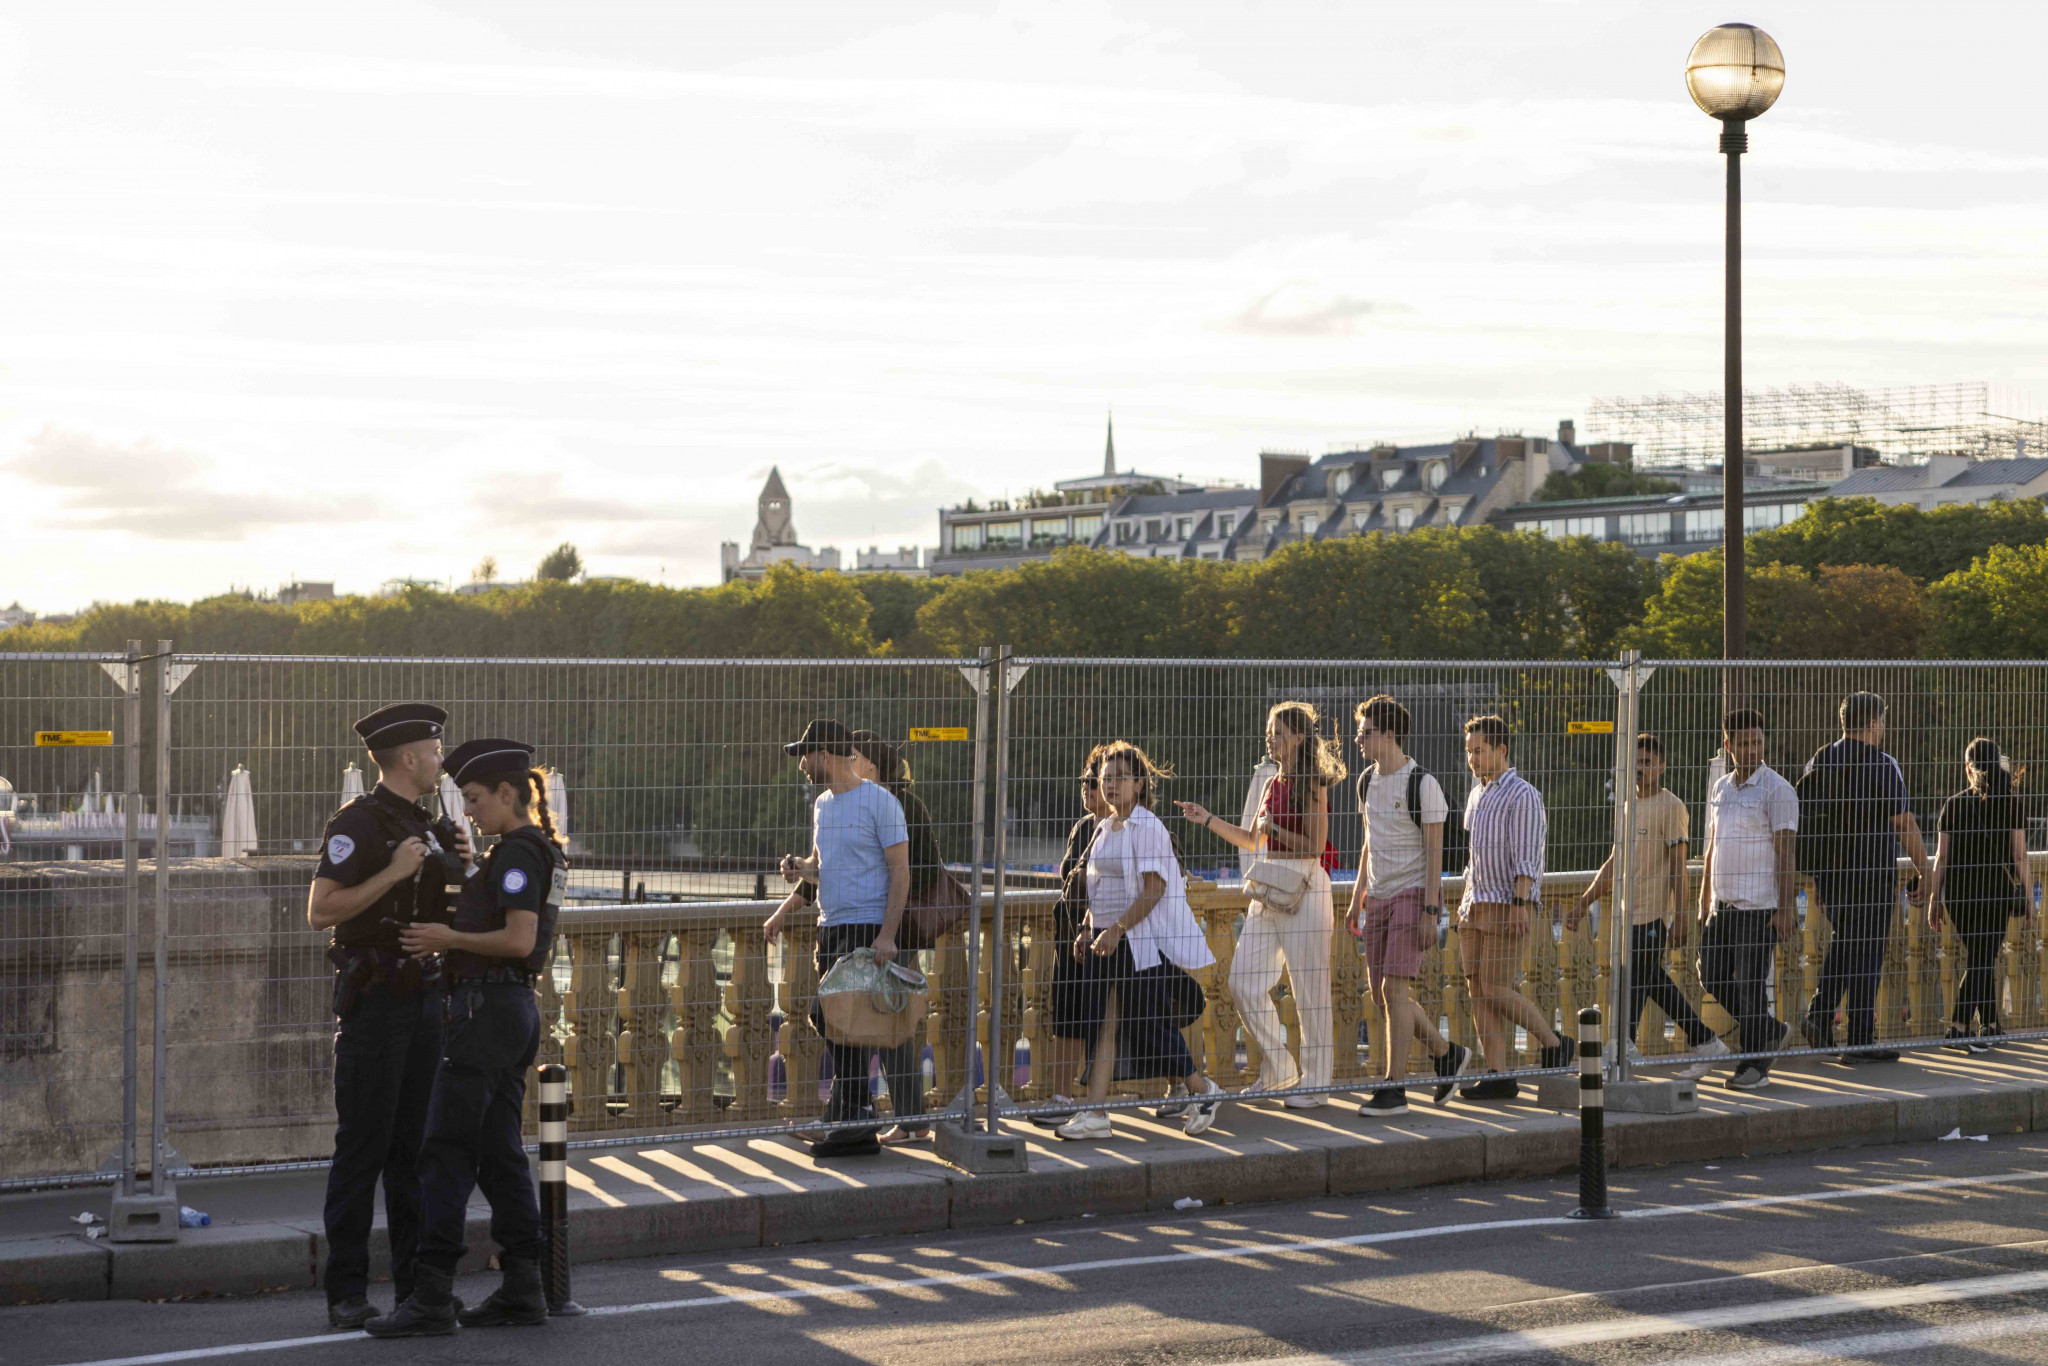 The Paris Opening Ceremony will take place on Friday 26 July along the River Seine. GETTY IMAGES